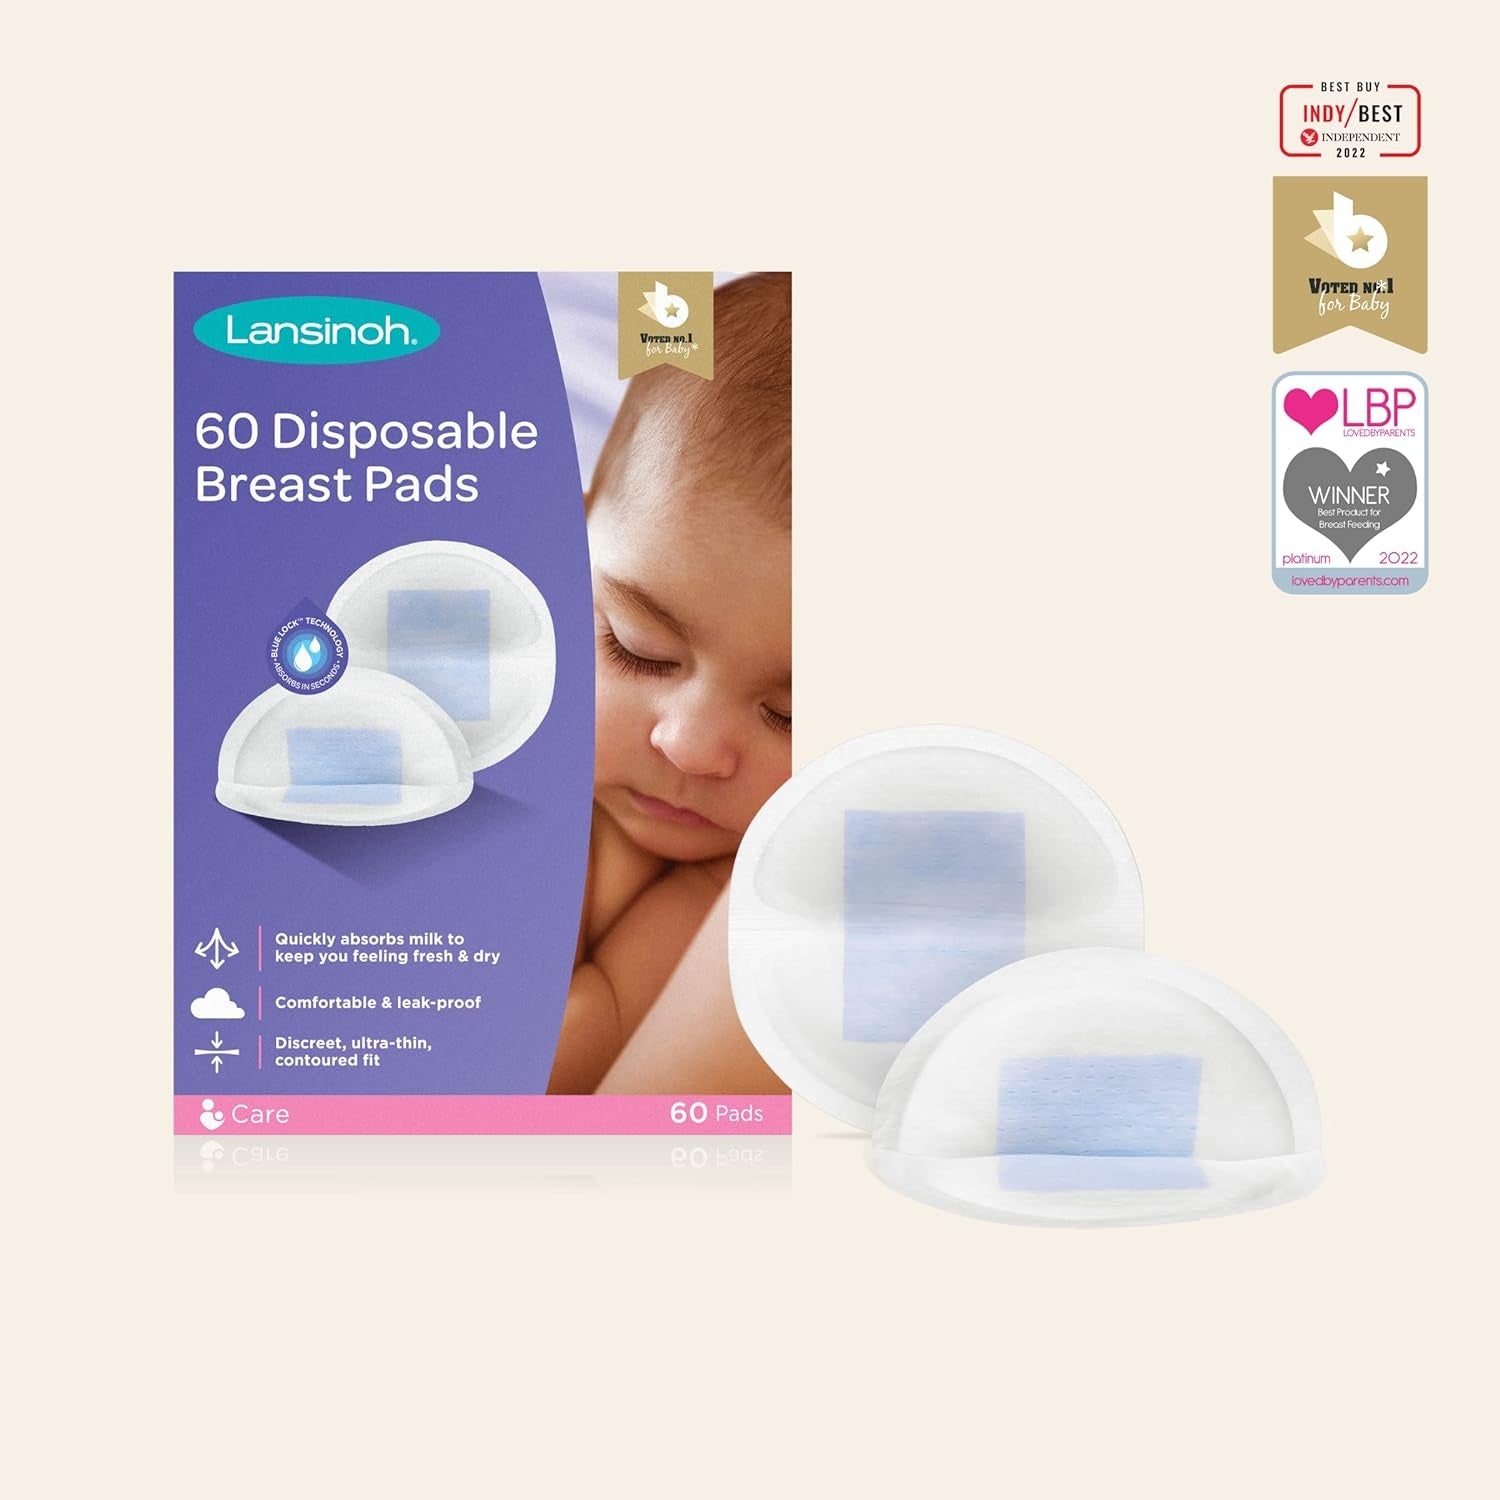 Lansinoh Disposable Breast Pads for nursing breastfeeding mothers